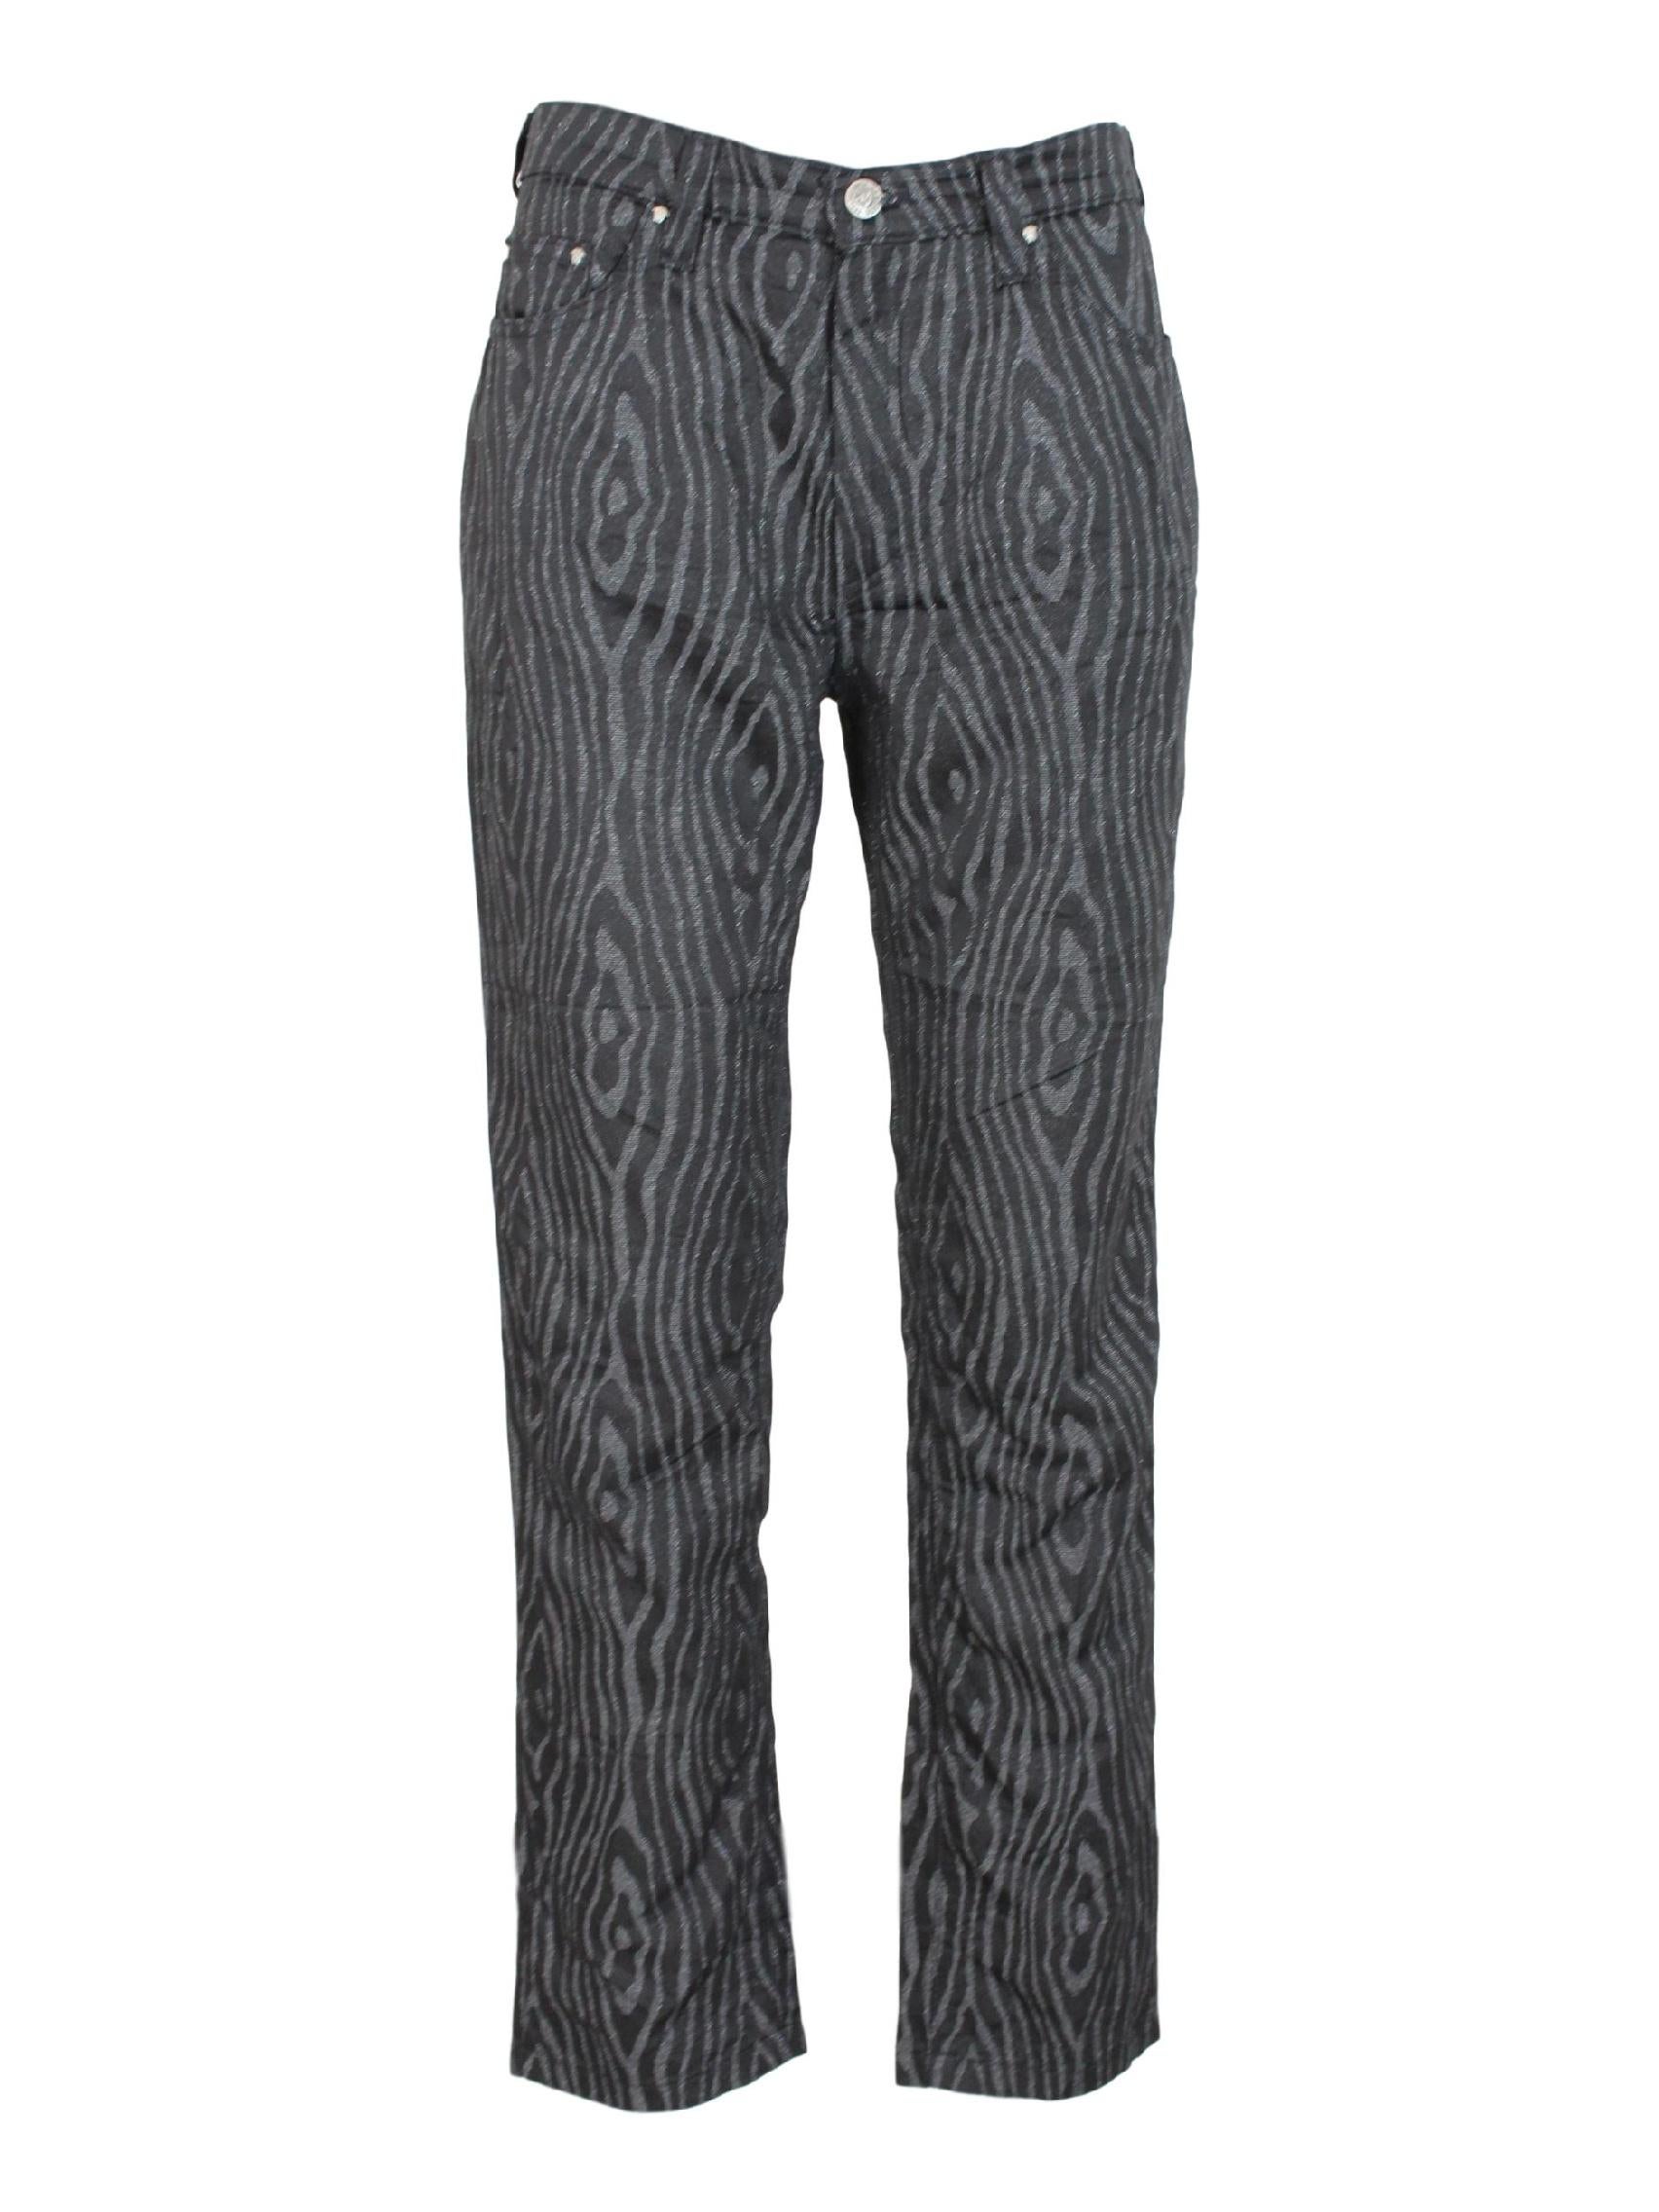 Gianni Versace Black Gray Pinstripe Spotted Lurex Trousers In Excellent Condition In Brindisi, Bt